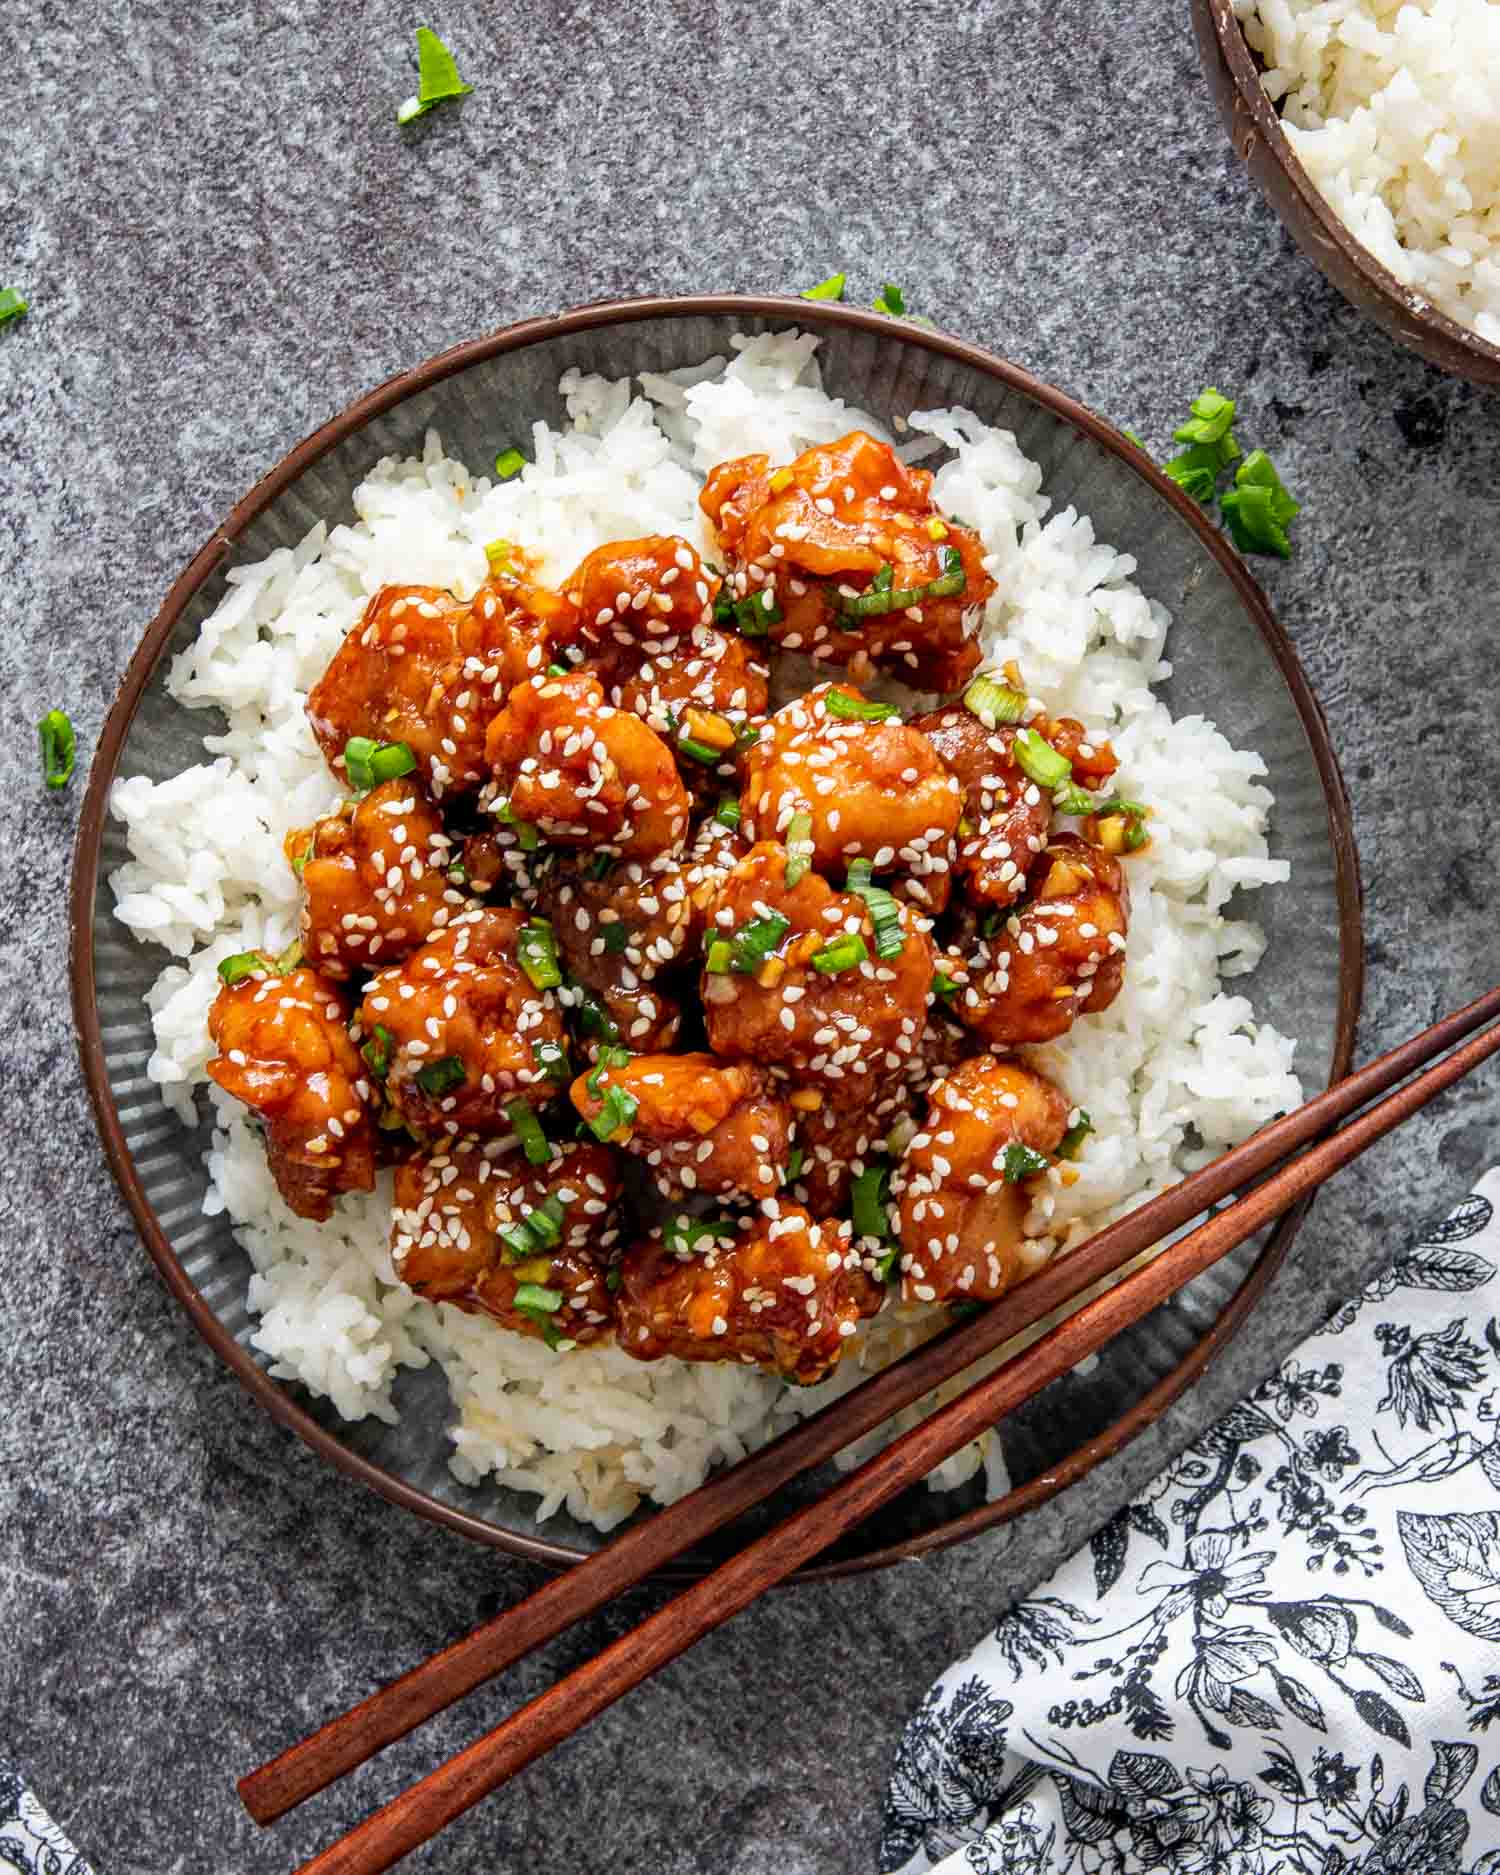 general tso's chicken over a bed of rice in a plate with chop sticks.